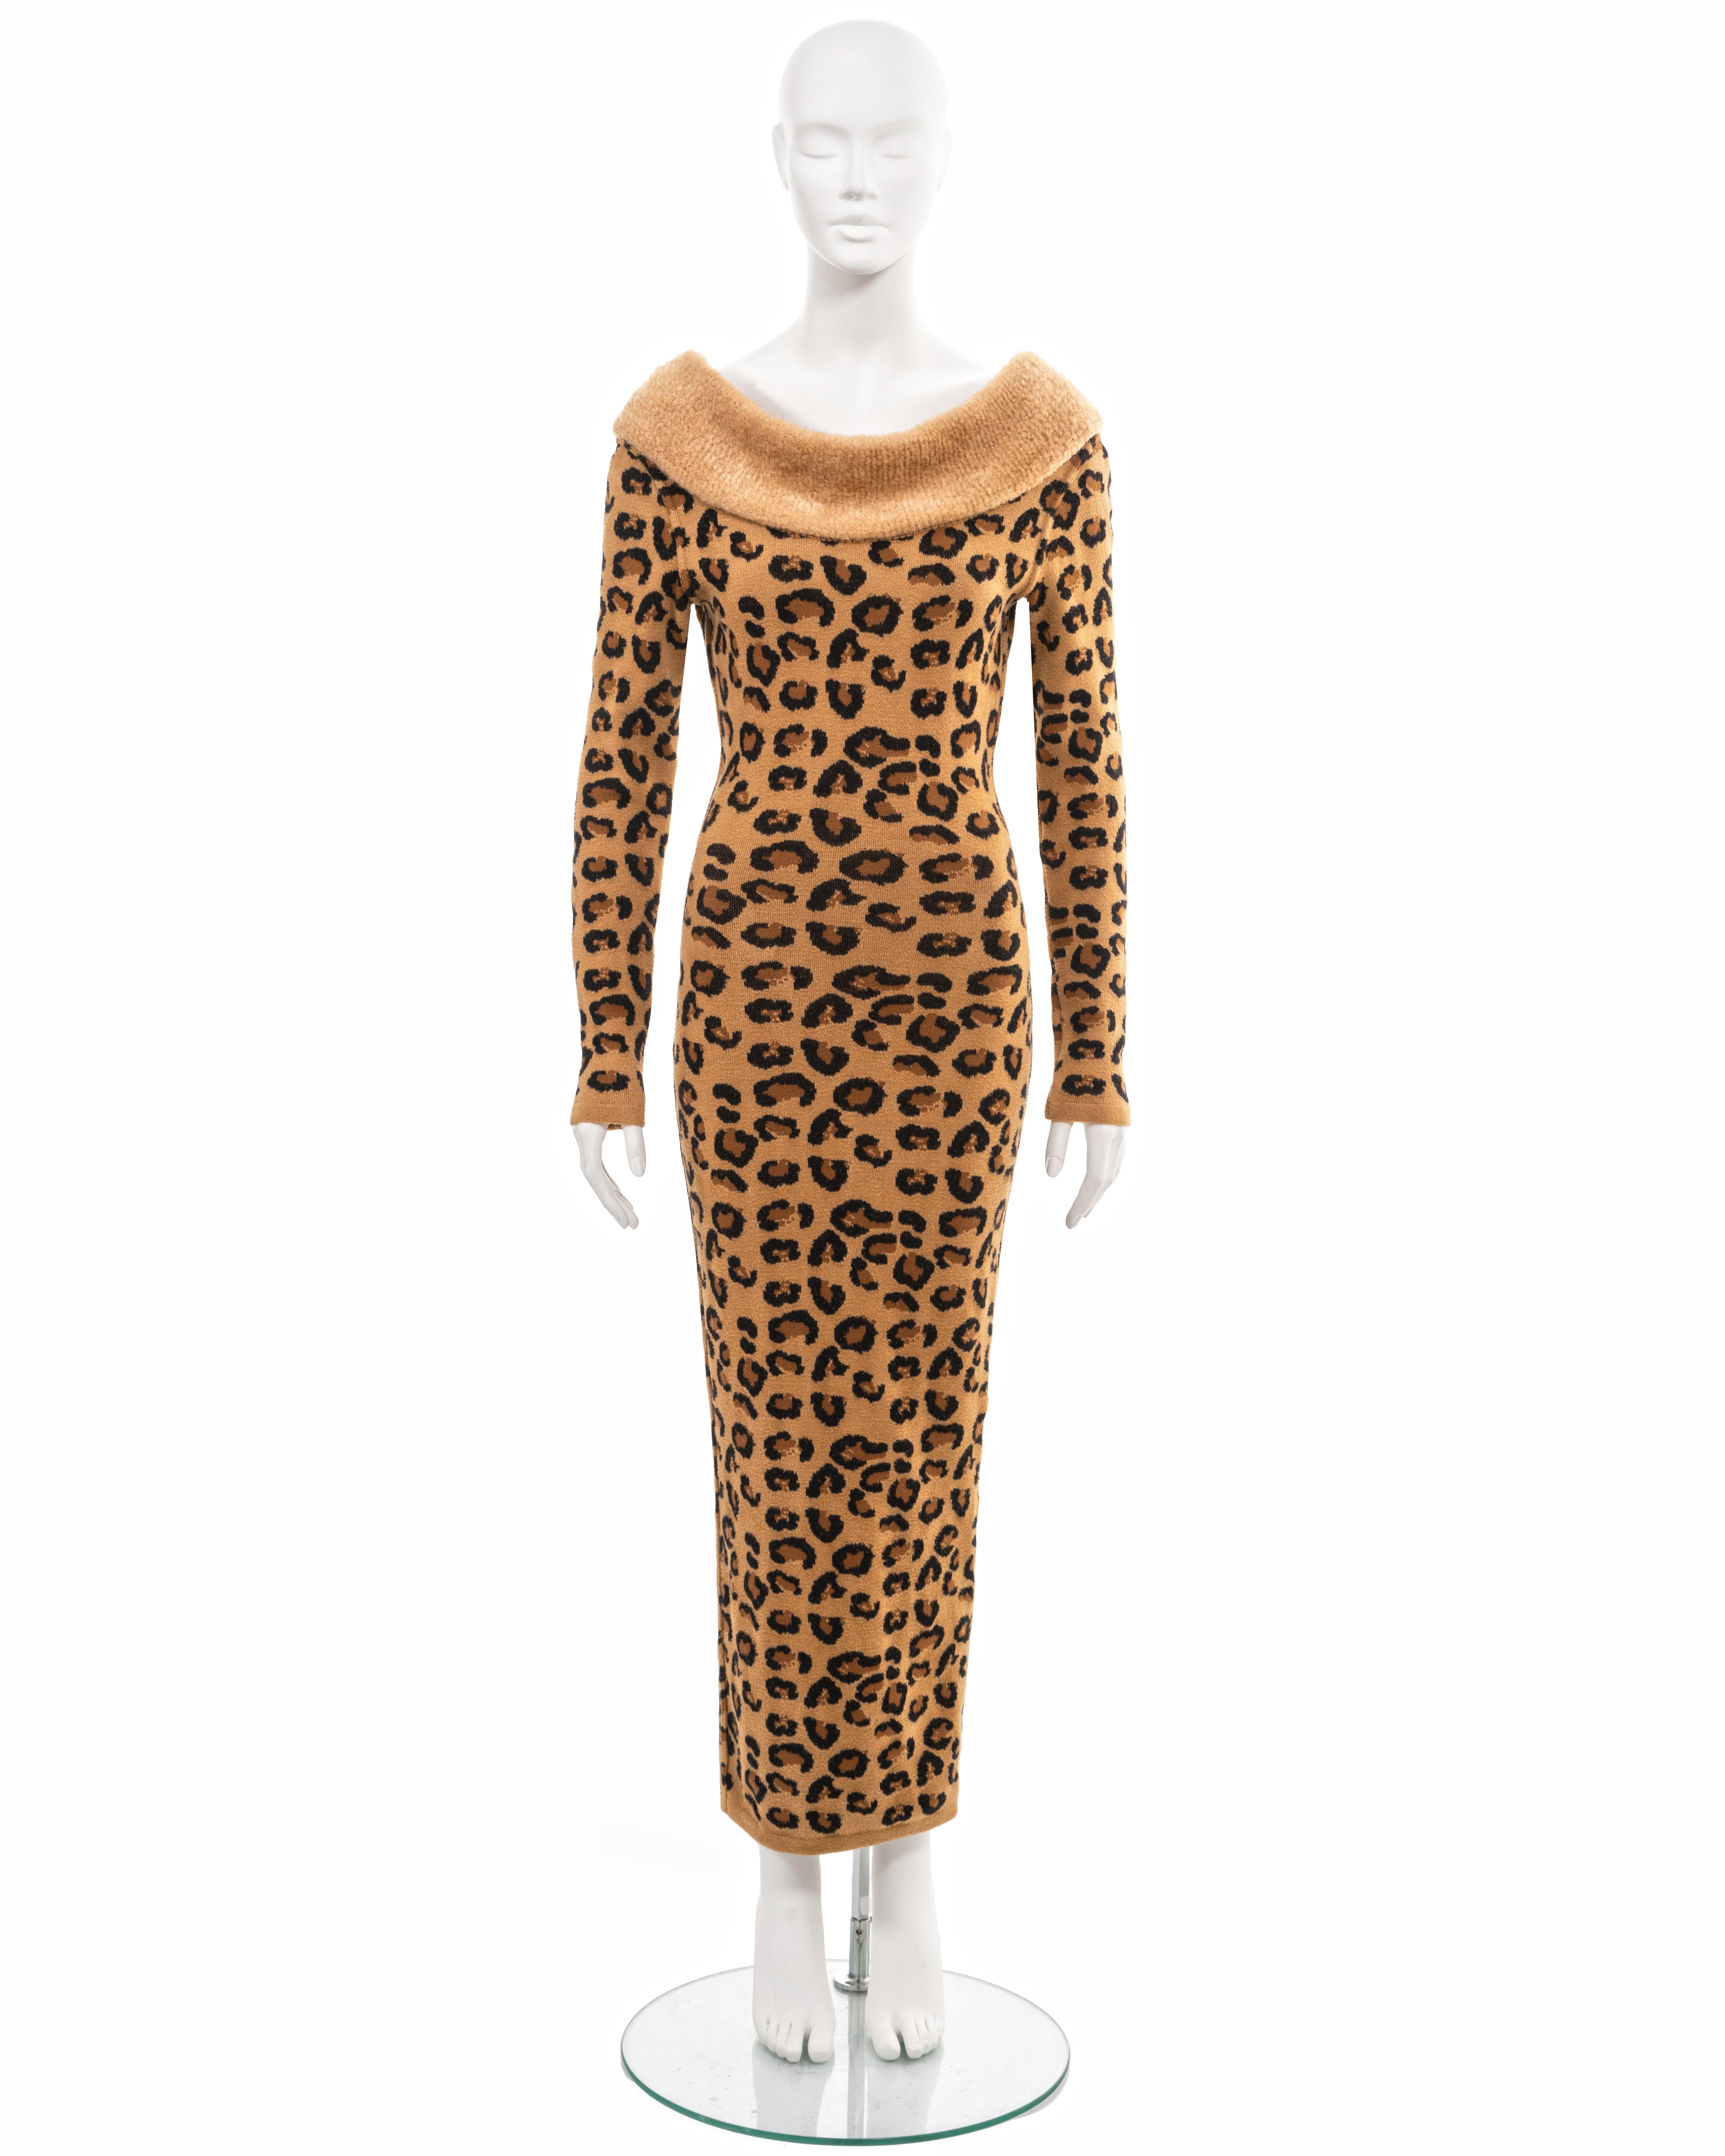 ▪ Azzedine Alaia archival dress
▪ Sold by One of a Kind Archive
▪ Fall-Winter 1991
▪ Museum Grade 
▪ Figure-hugging leopard knit in a worsted wool and rayon blend 
▪ Broad bateau neckline with ribbed collar 
▪ Long fitted sleeves 
▪ Zippers to back